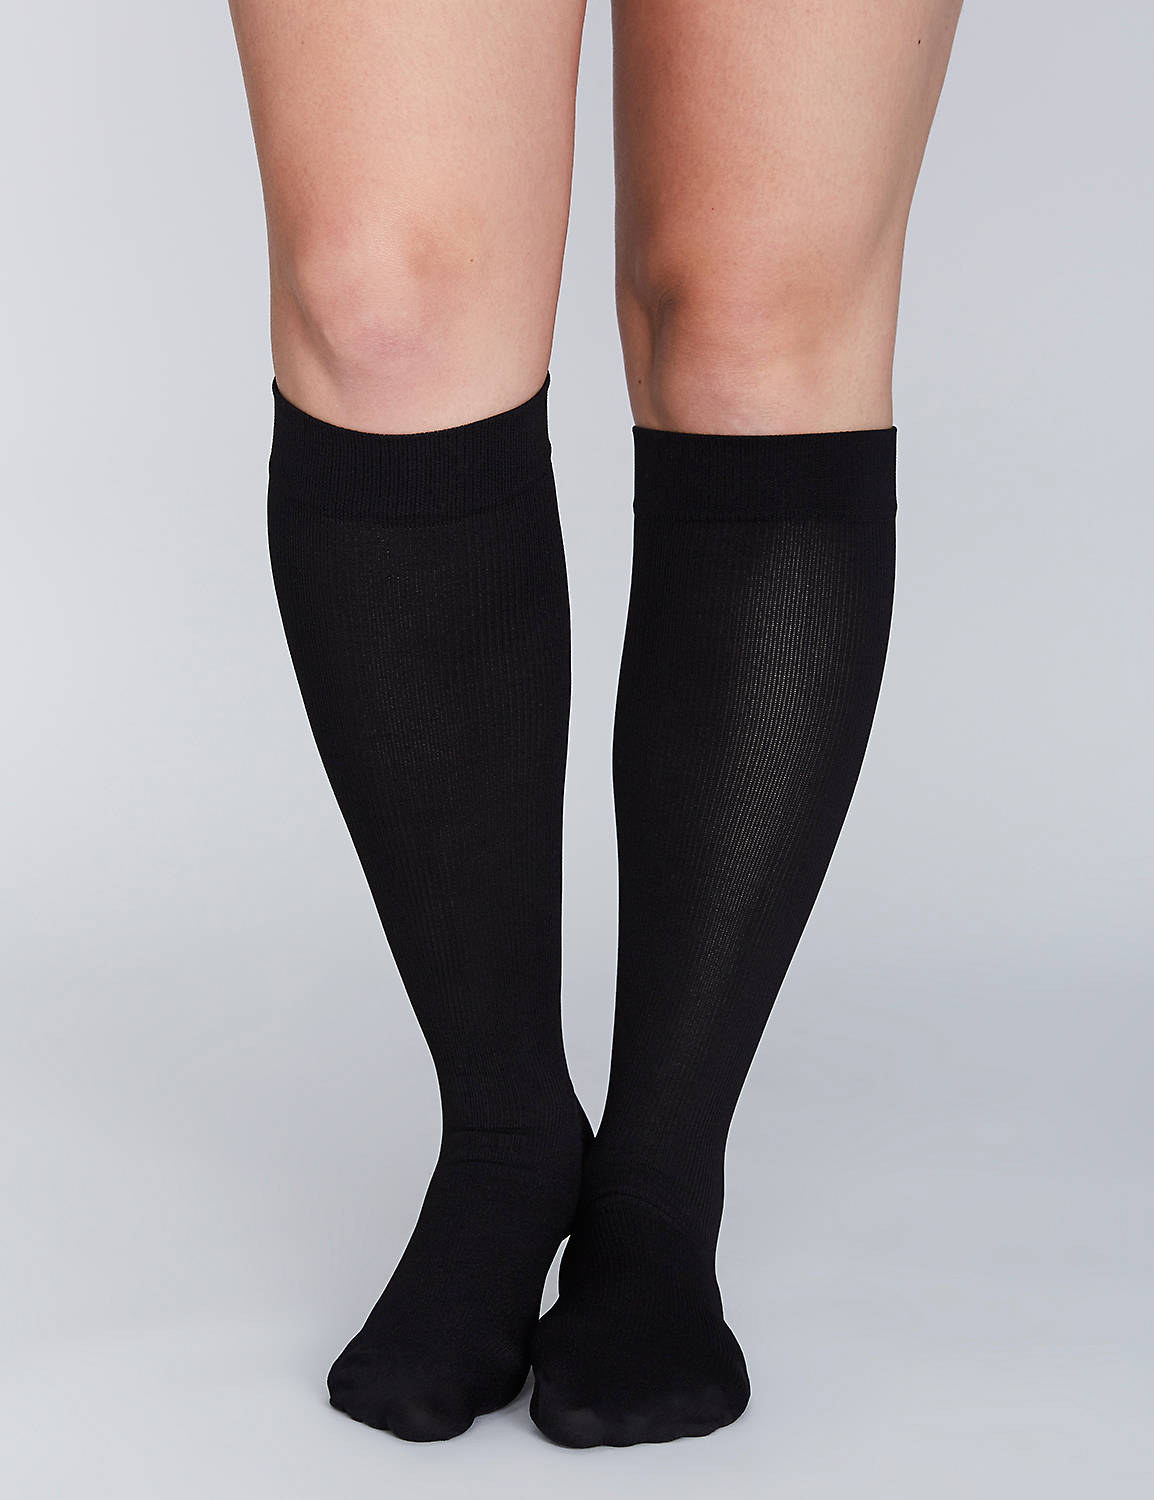 Compression Sock - Extra Wide Calf Product Image 1